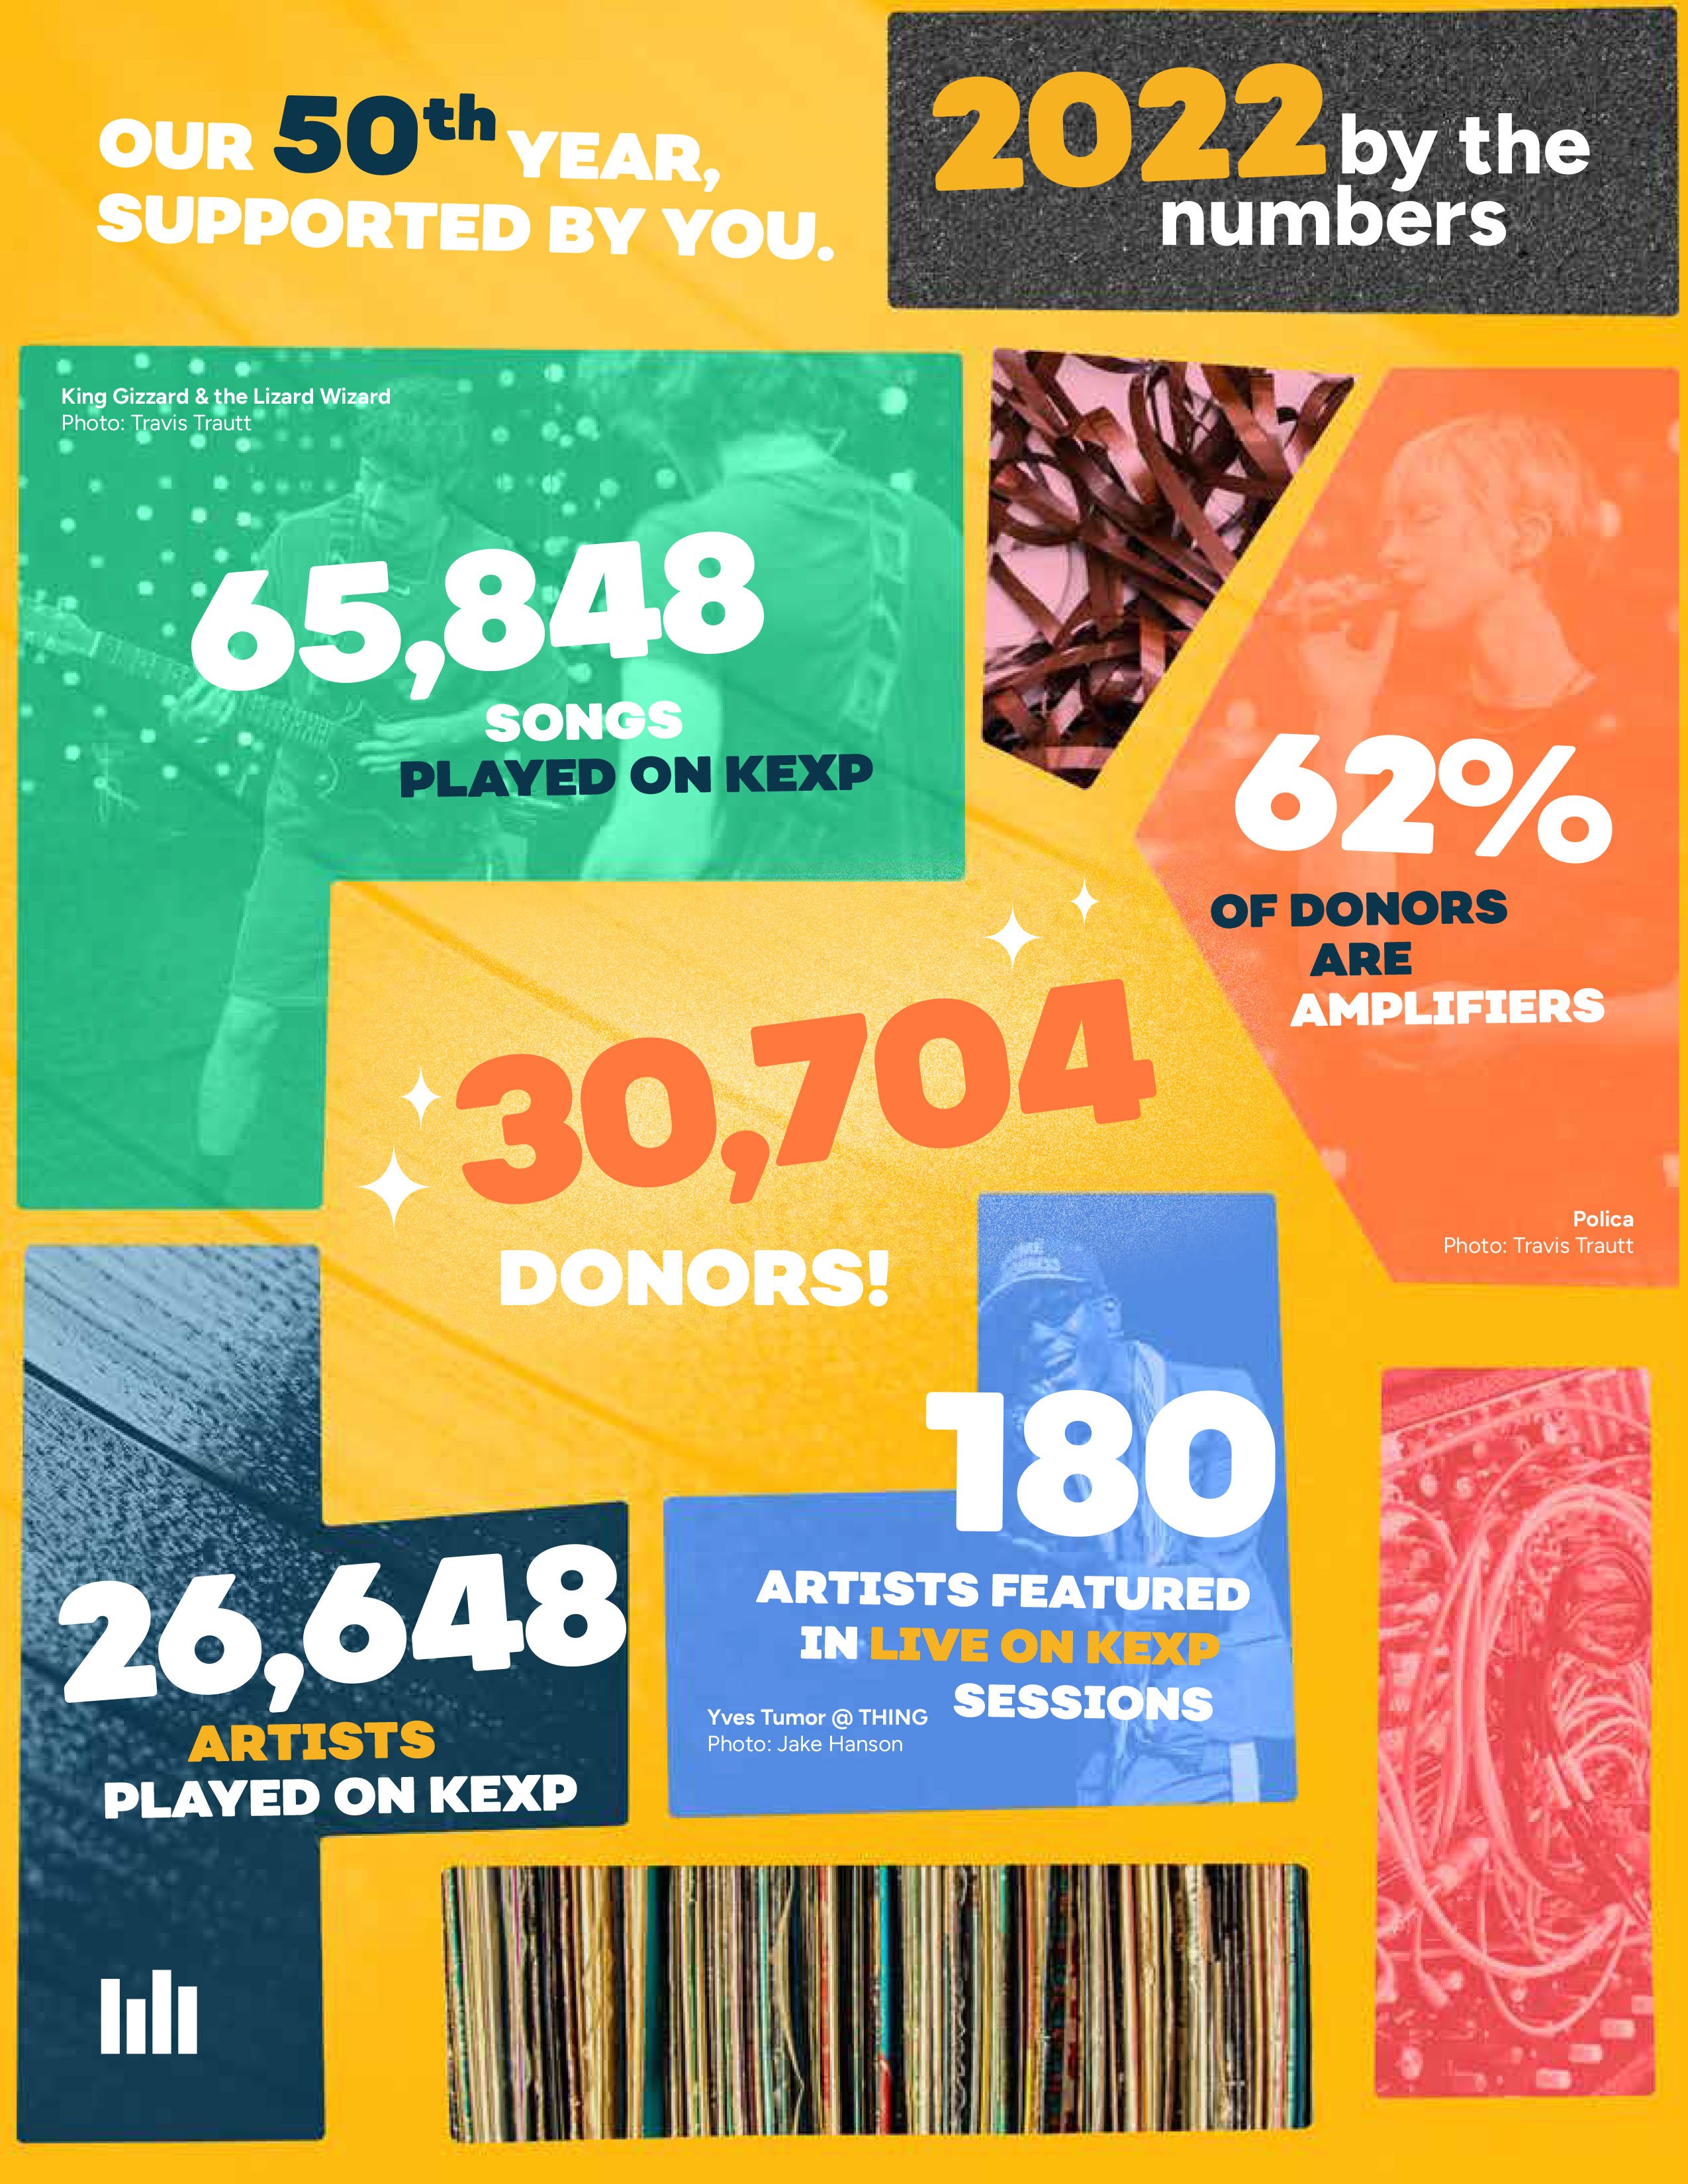 Infographic: 2022 By the Numbers. 65,848 songs  played on KEXP; 180 artists featured in Live On KEXP sessions; 30,704 donors; 62% of donors were Amplifiers; 26,648 artists played on KEXP.